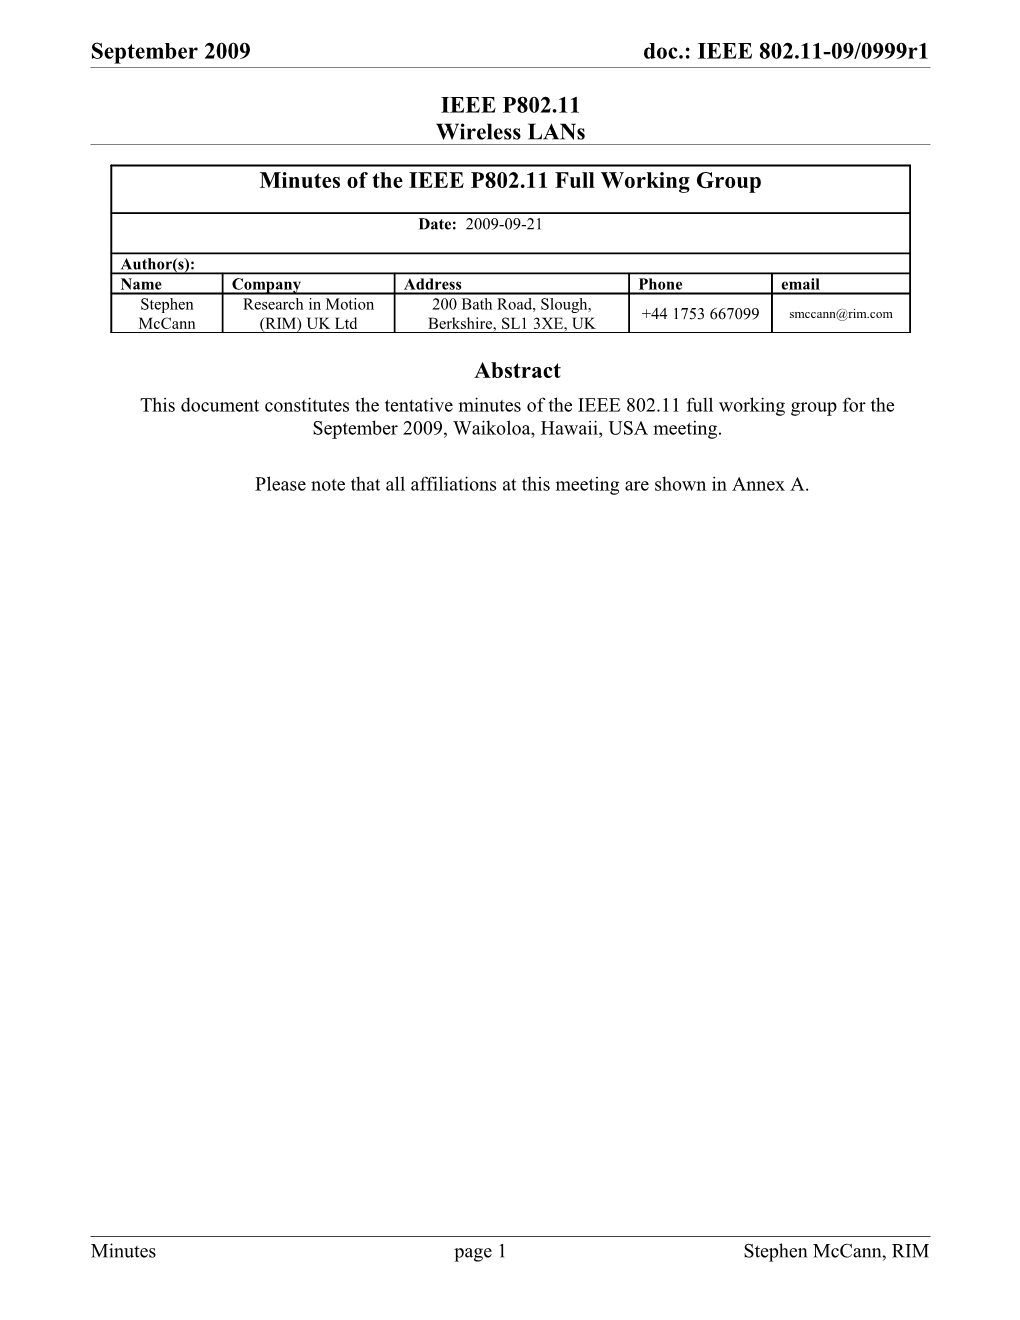 Minutes of the IEEE P802.11 Full Working Group s1